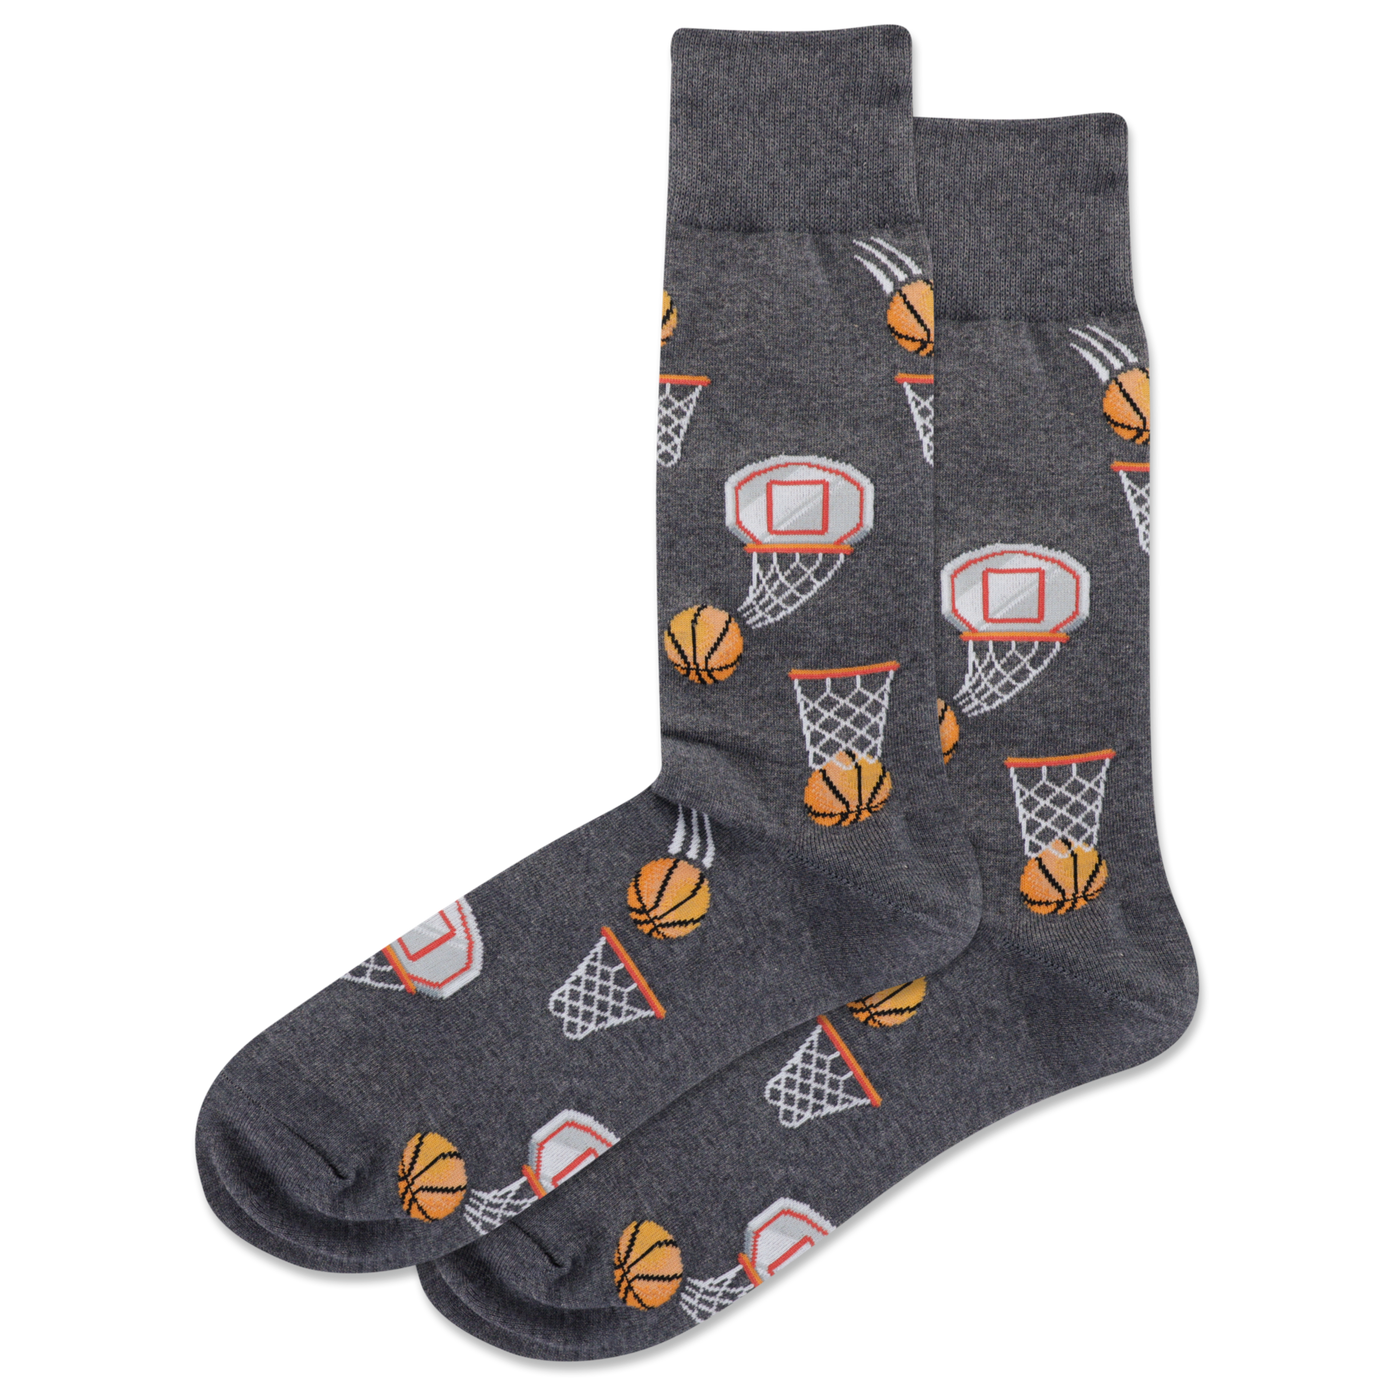 "Basketball" Cotton Crew Socks by Hot Sox - Large